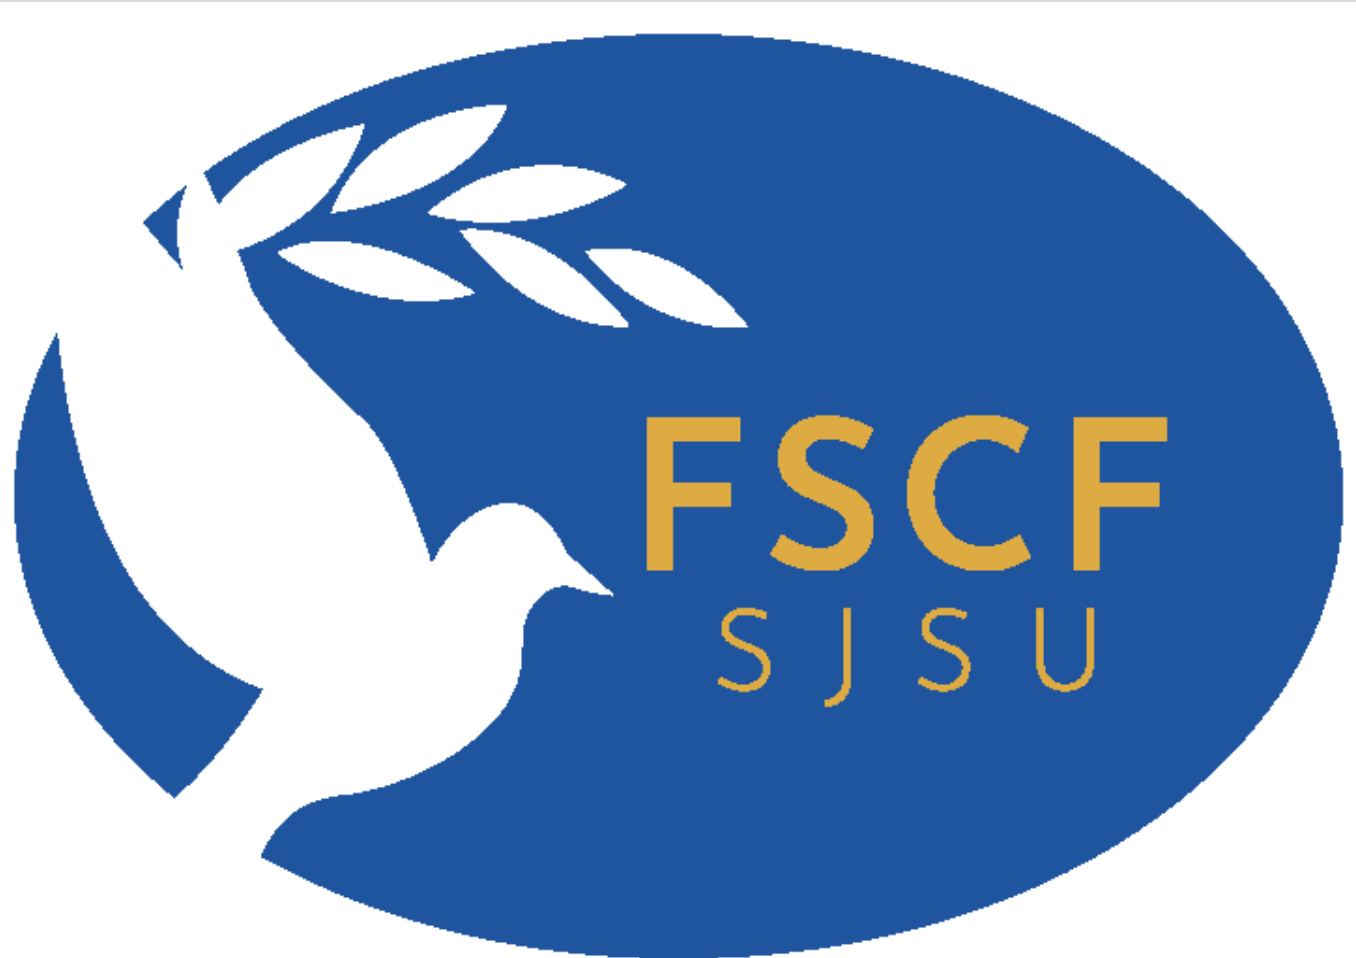 A white dove on a blue background with the letters FSCF SJSU in gold